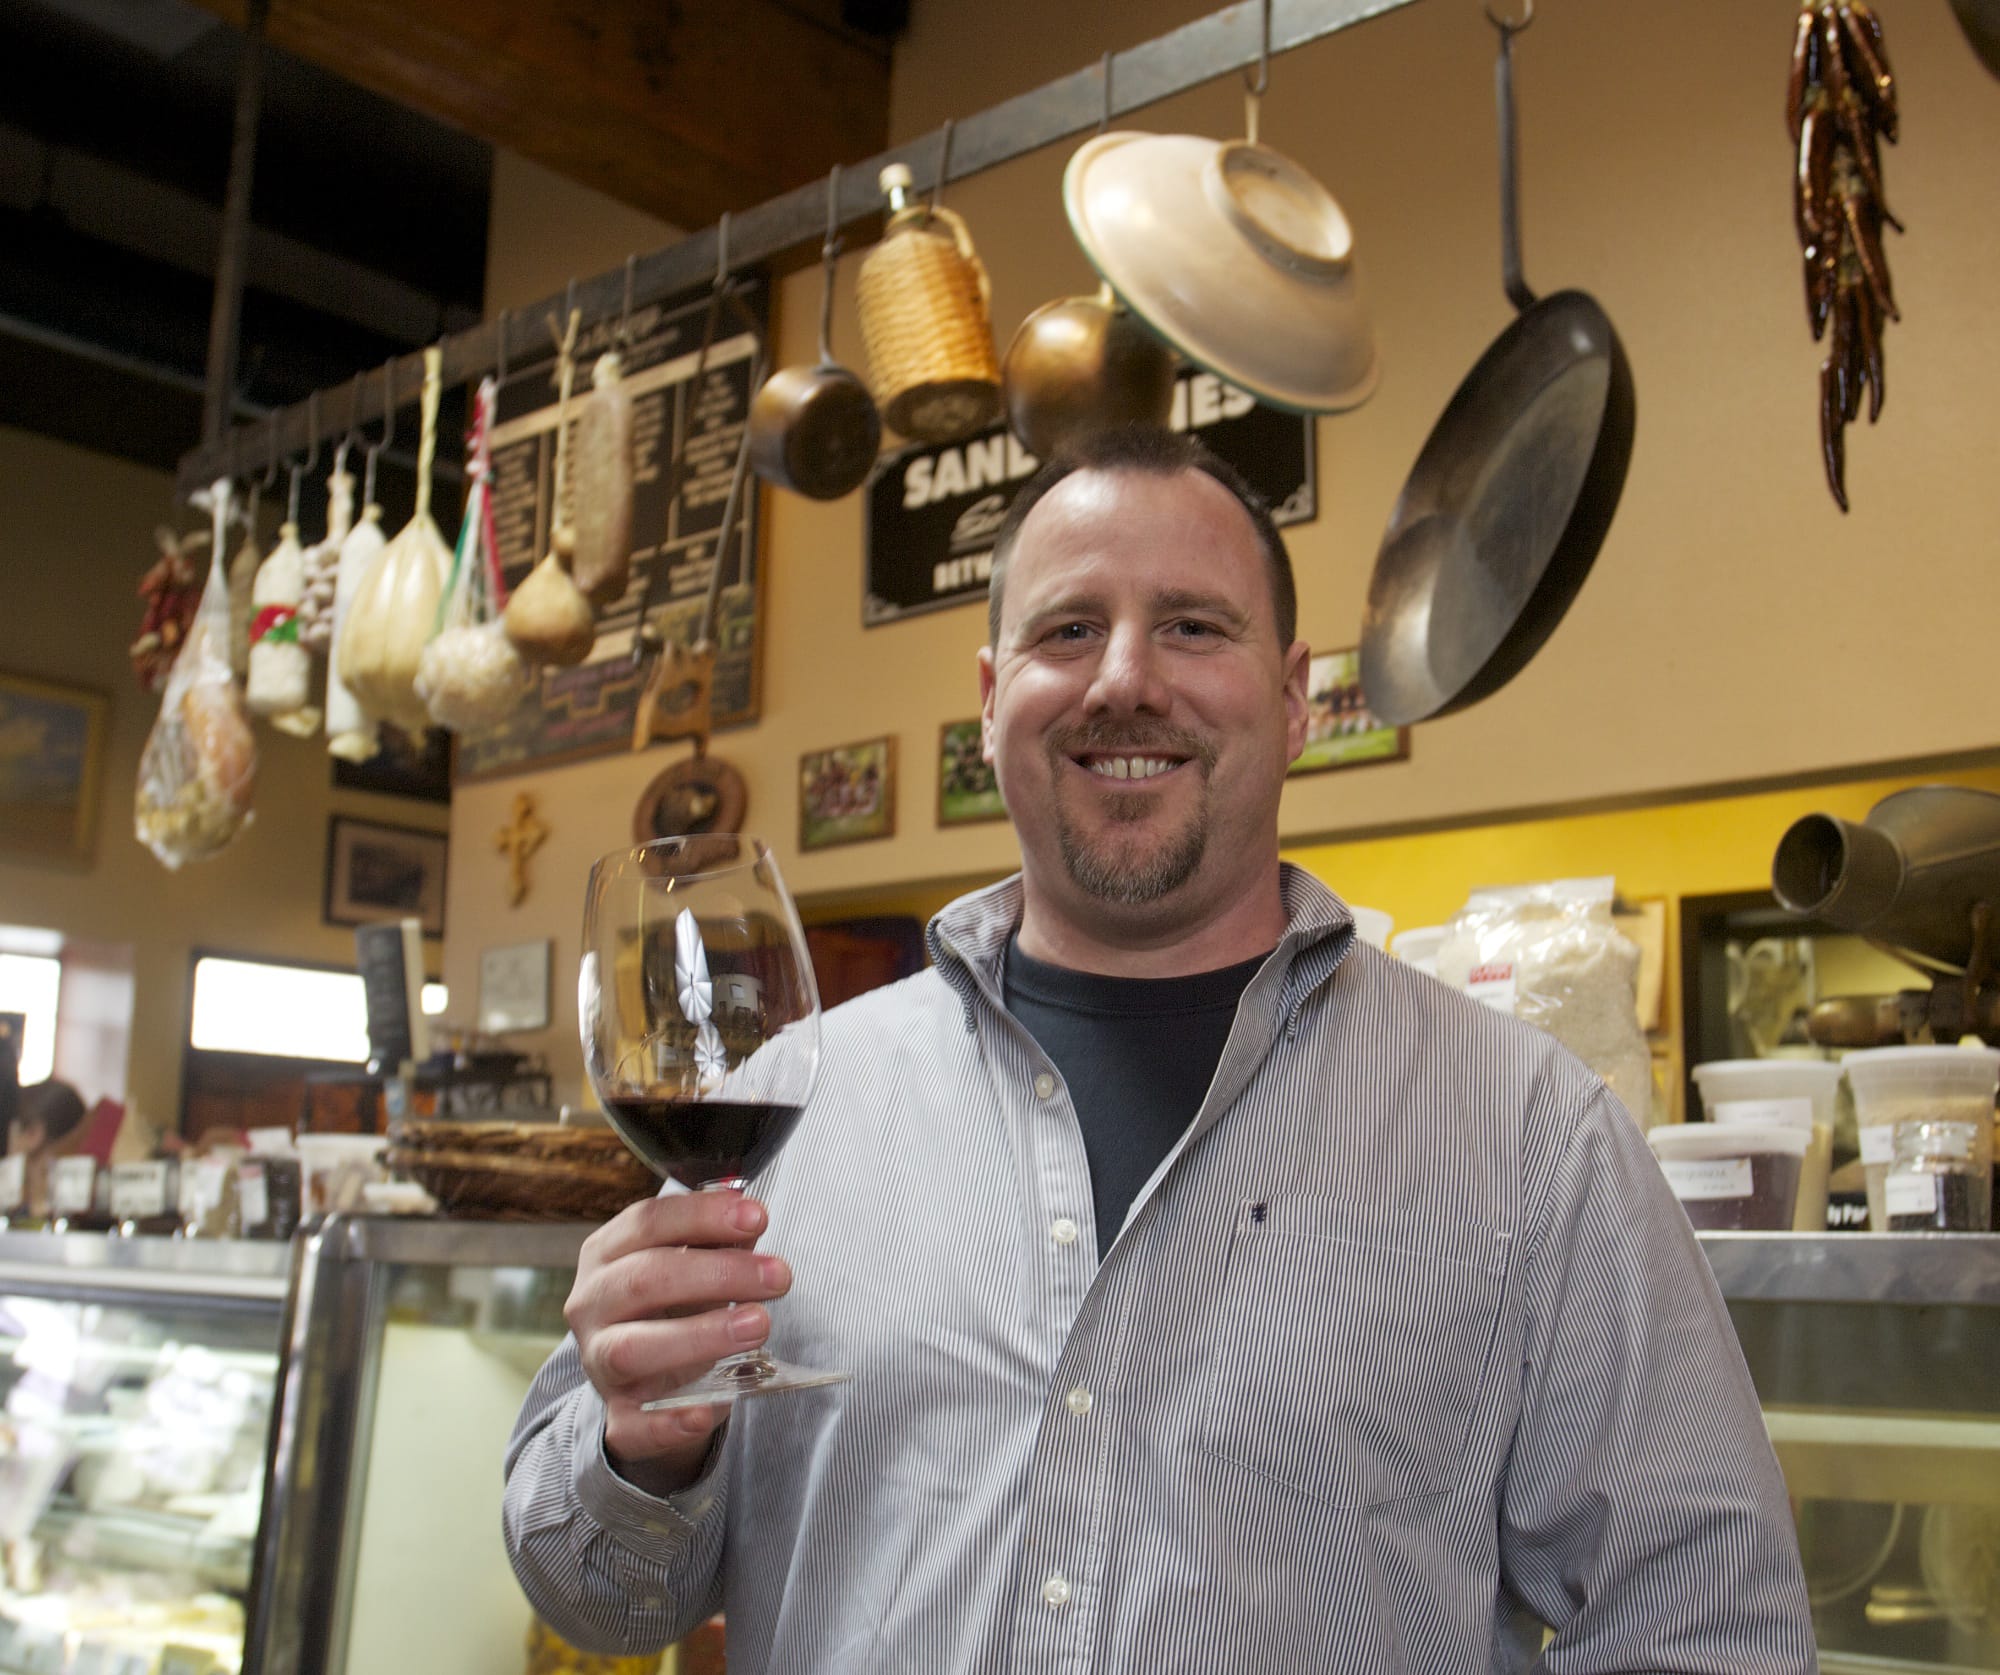 Peter Dougherty is the chef and owner of La Bottega in Vancouver.